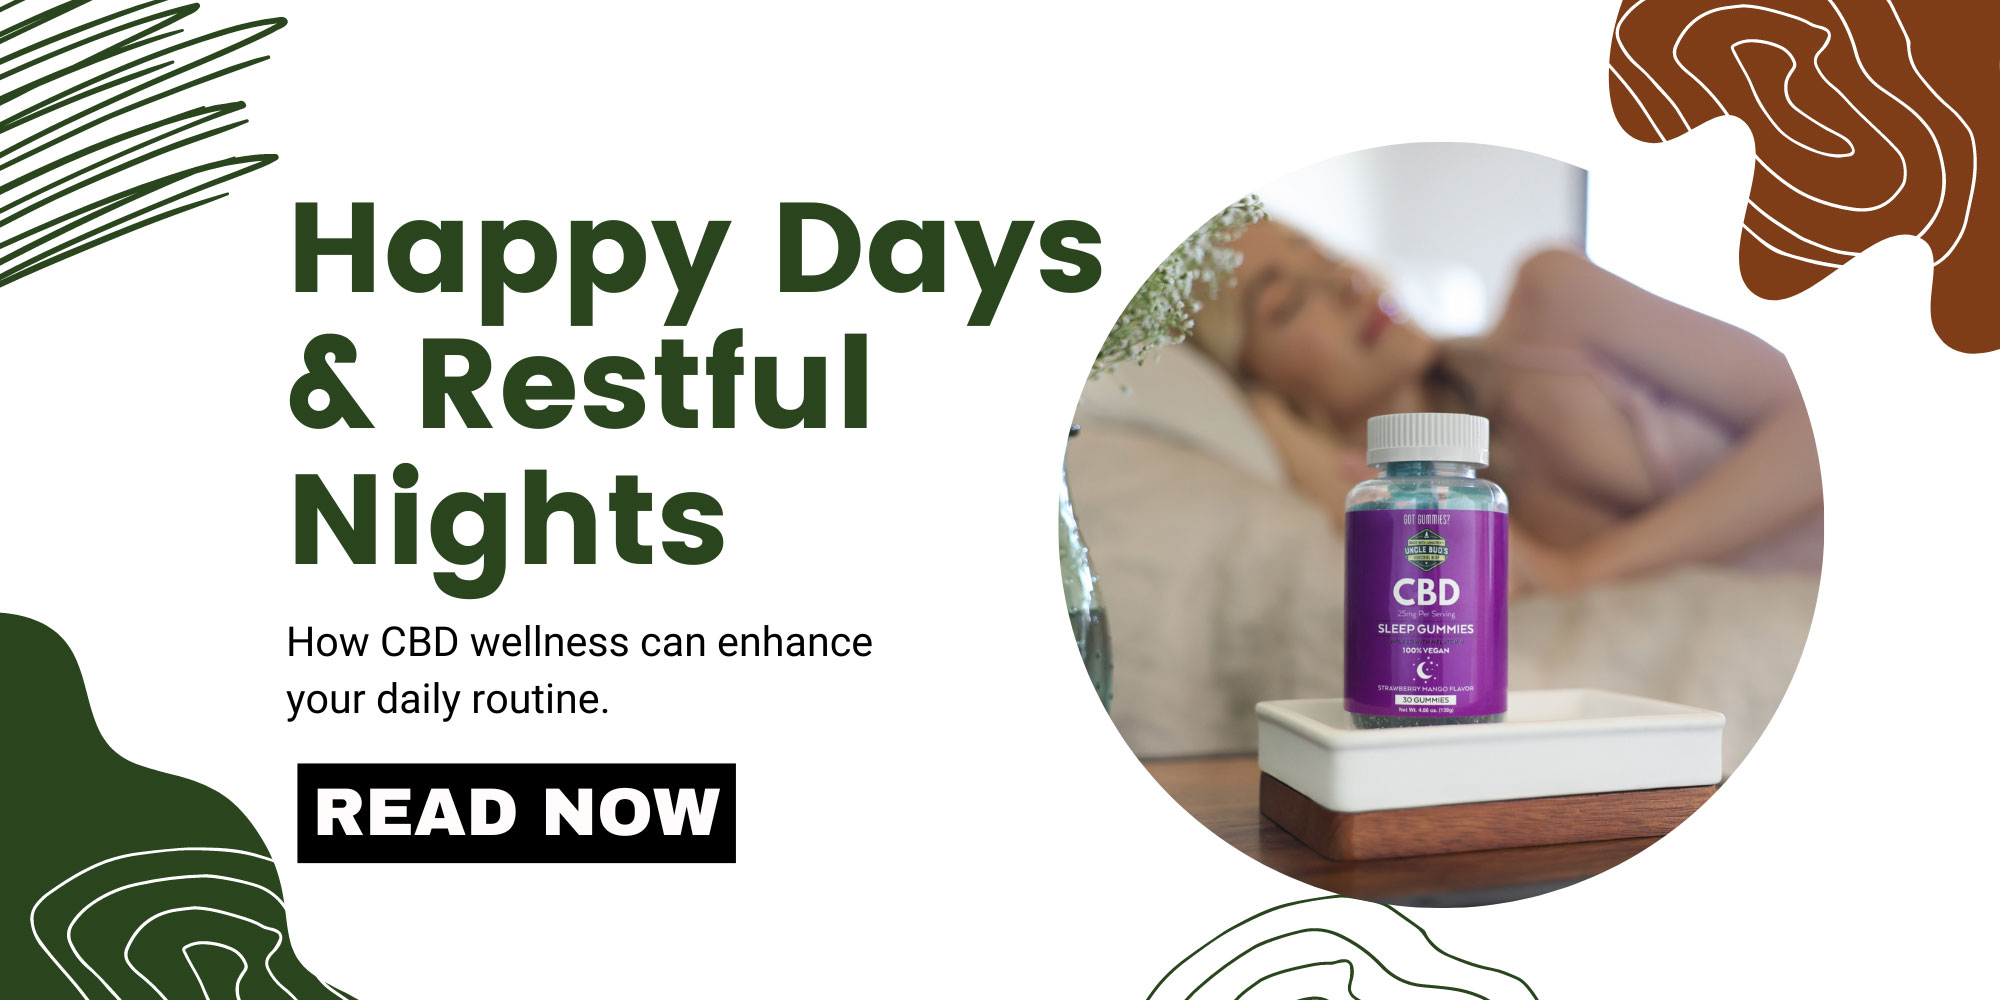 CBD can enhance your daily routine